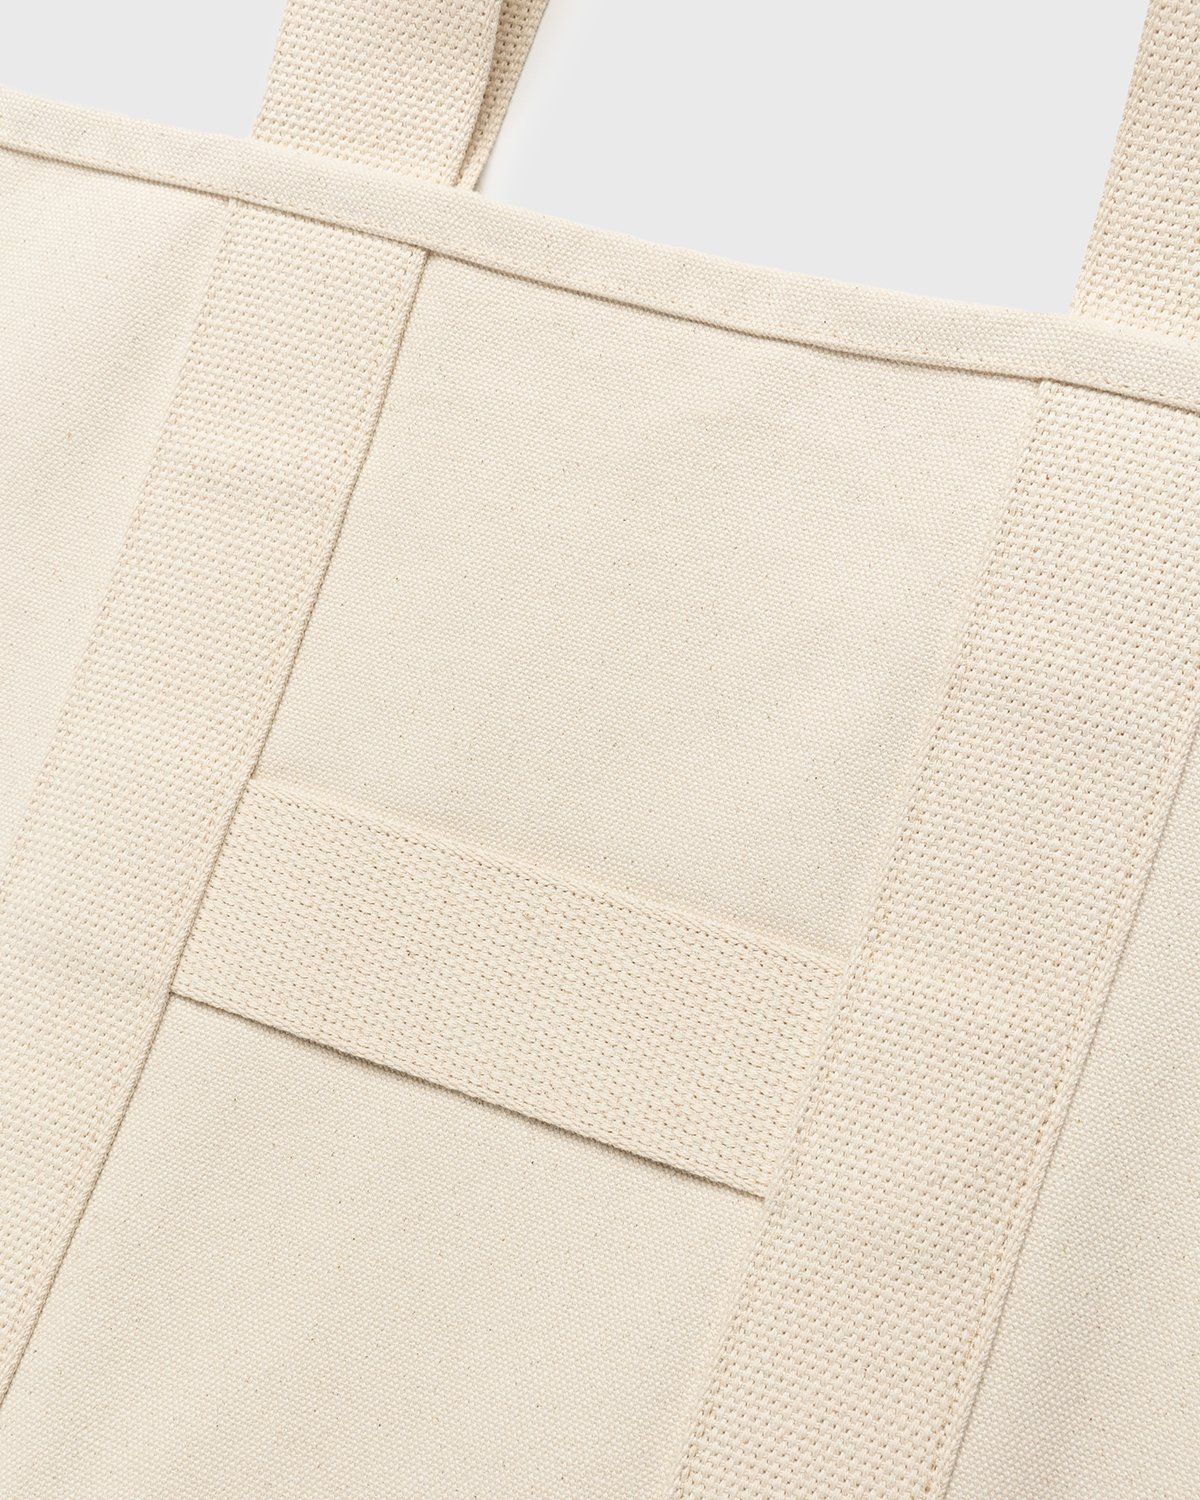 Highsnobiety – XL Canvas "H" Tote Natural - Tote Bags - Beige - Image 4